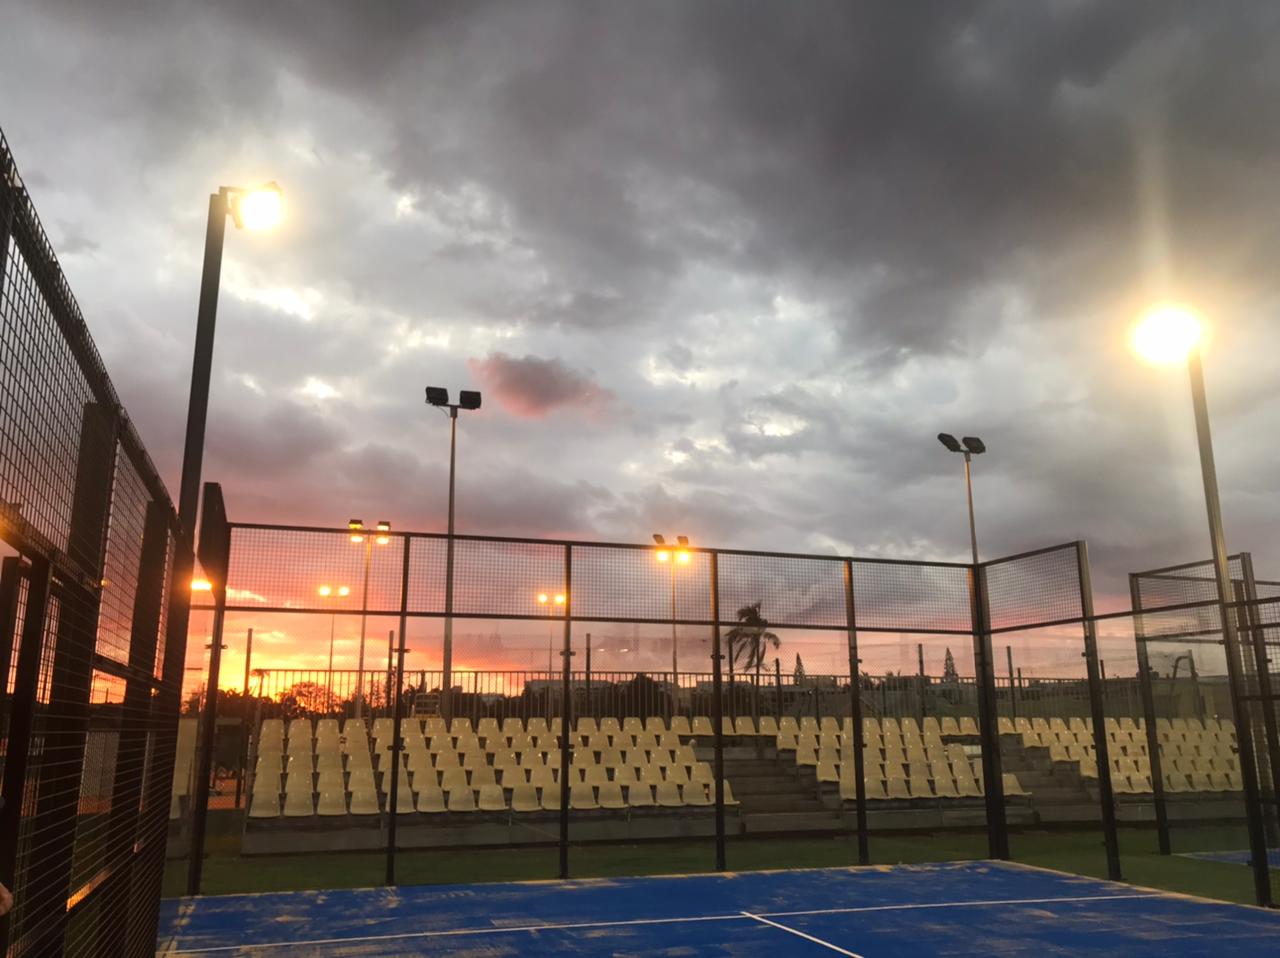 USPG – Inauguration of padel and P1000 in Reunion!